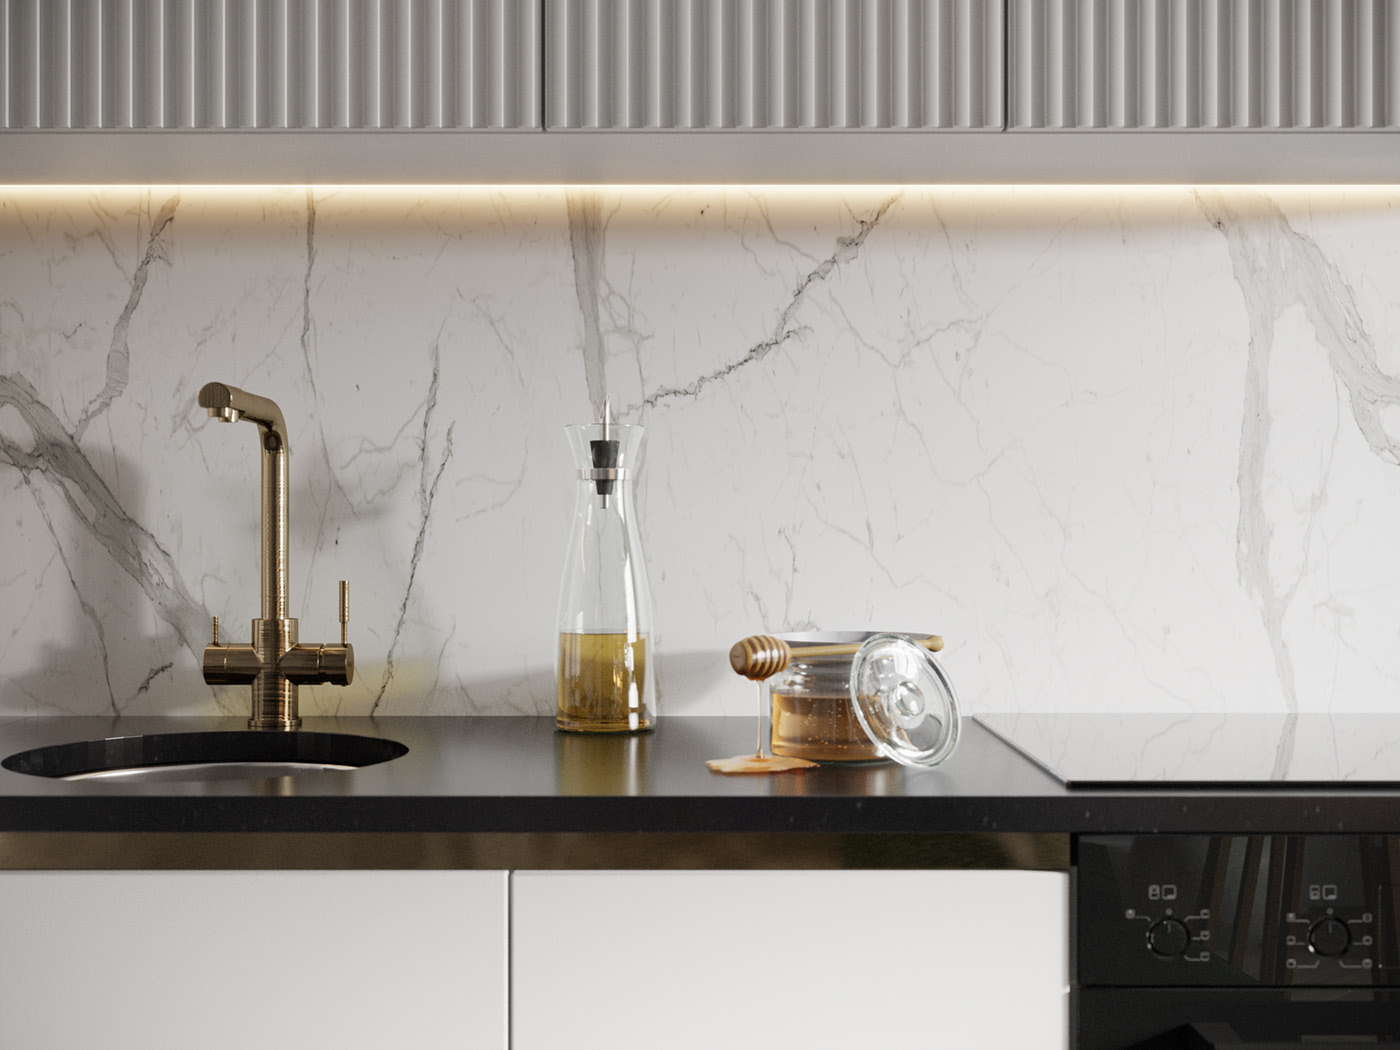 High-quality gold-plated sink faucet with a luxurious European-style design that enhances beauty and convenience in the kitchen.